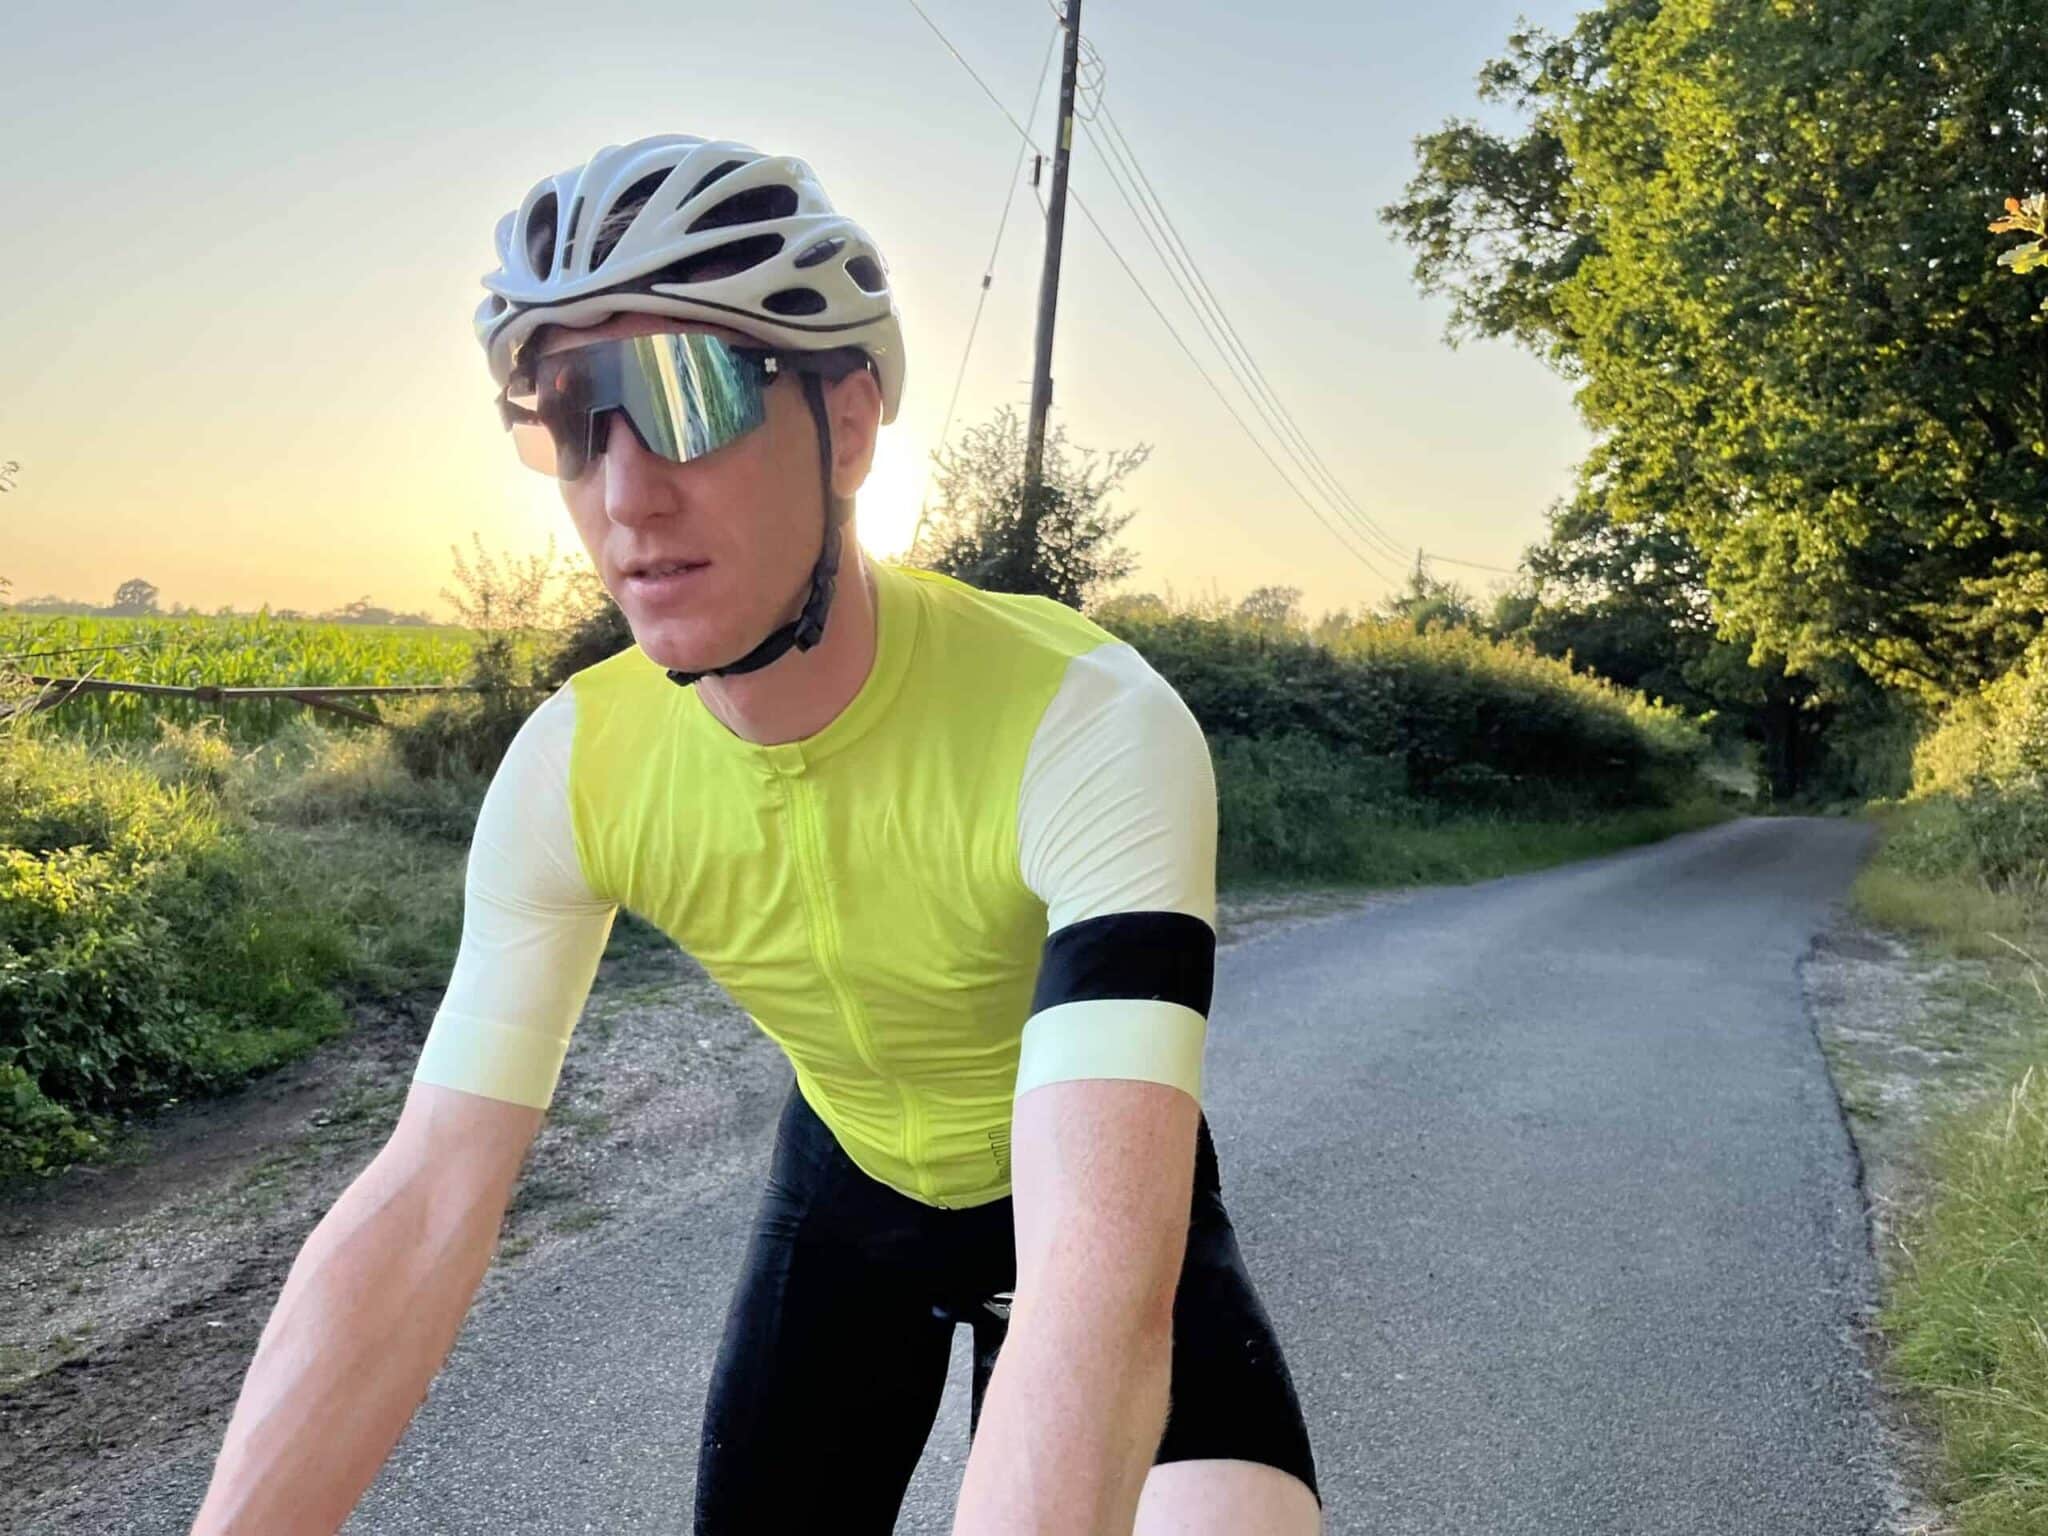 closed up shot of cyclist wearing yellow green